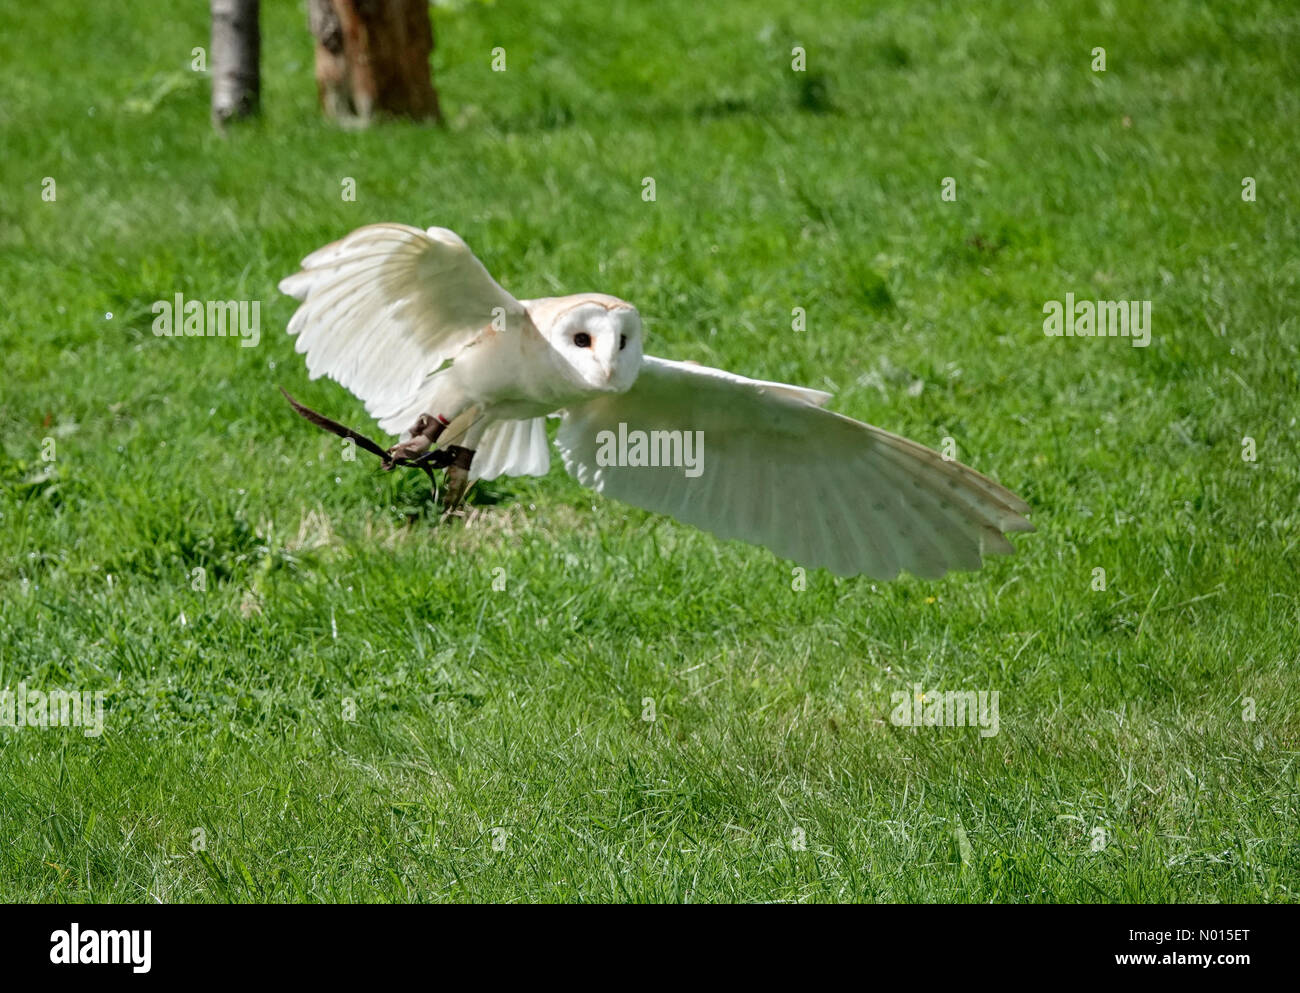 UK Weather: Sunny intervals in Kent. Wildwood Trust, Herne. 07th August 2021. Sunny intervals between the showers across Kent. A barn owl in flight at Wildwood near Canterbury in Kent. Credit: jamesjagger/StockimoNews/Alamy Live News Stock Photo